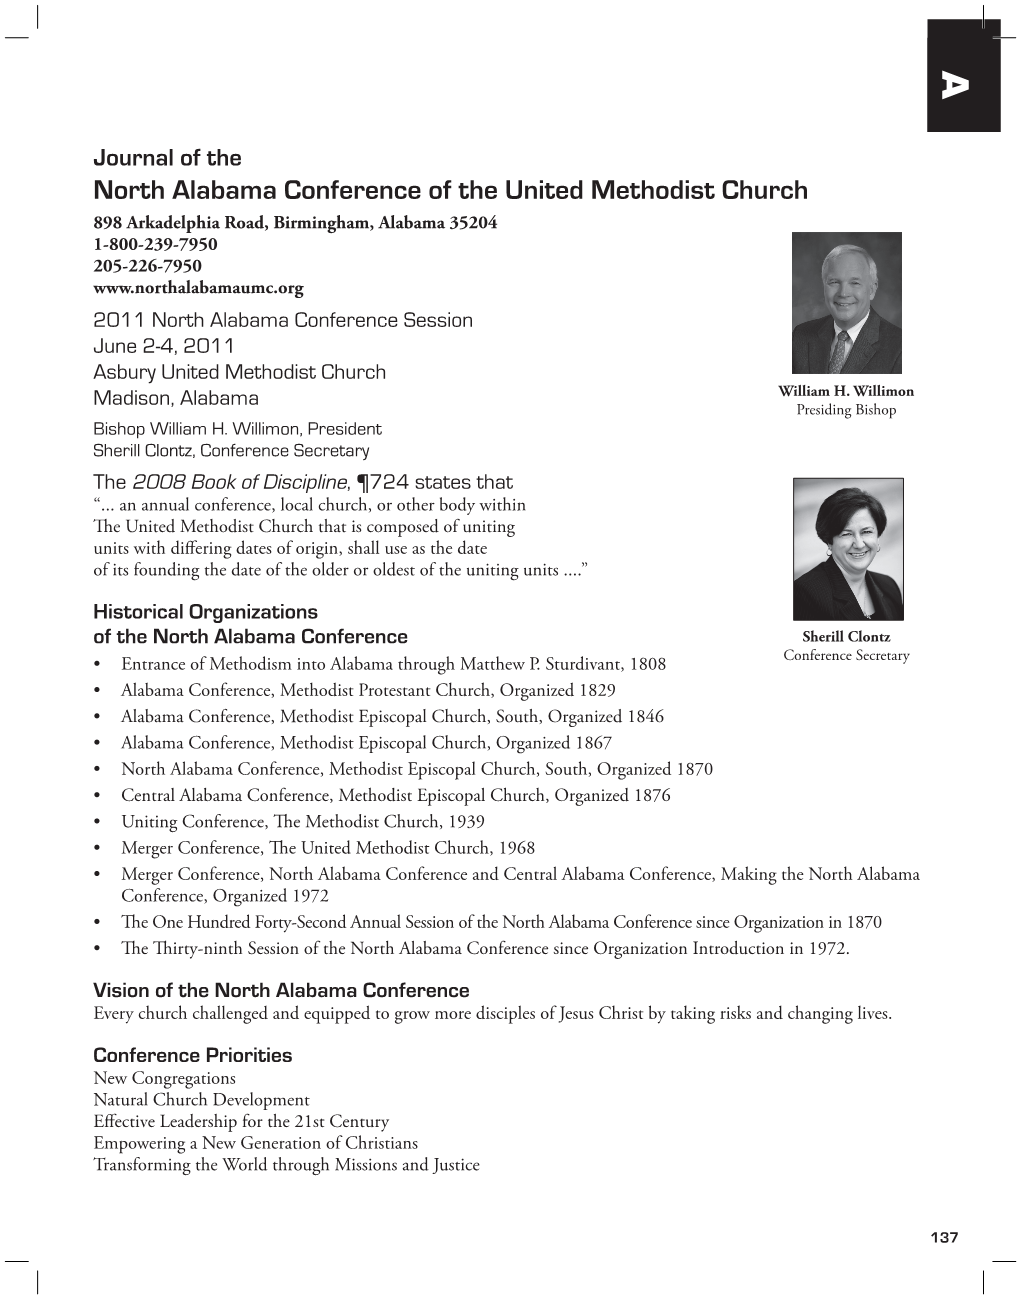 North Alabama Conference of the United Methodist Church